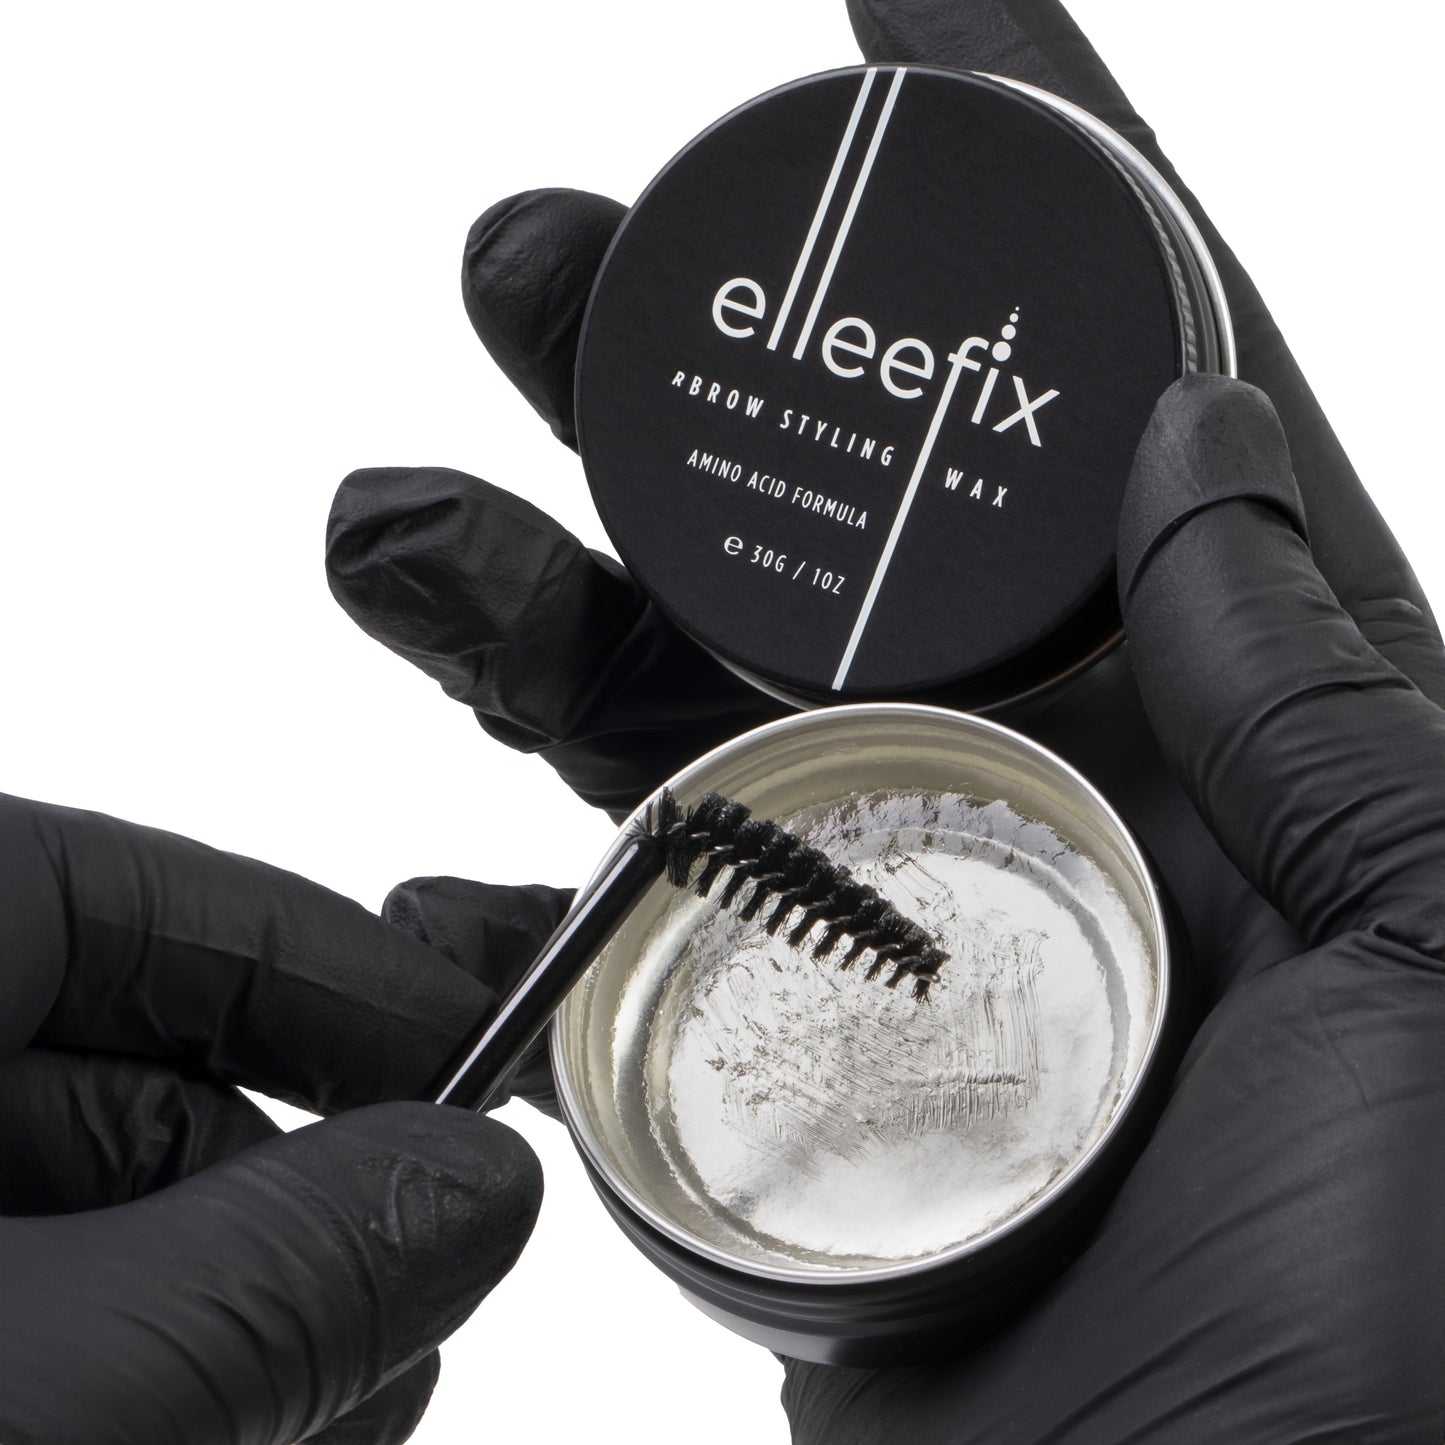 ELLEEFIX – brow styling wax 30g | Brow lamination after care